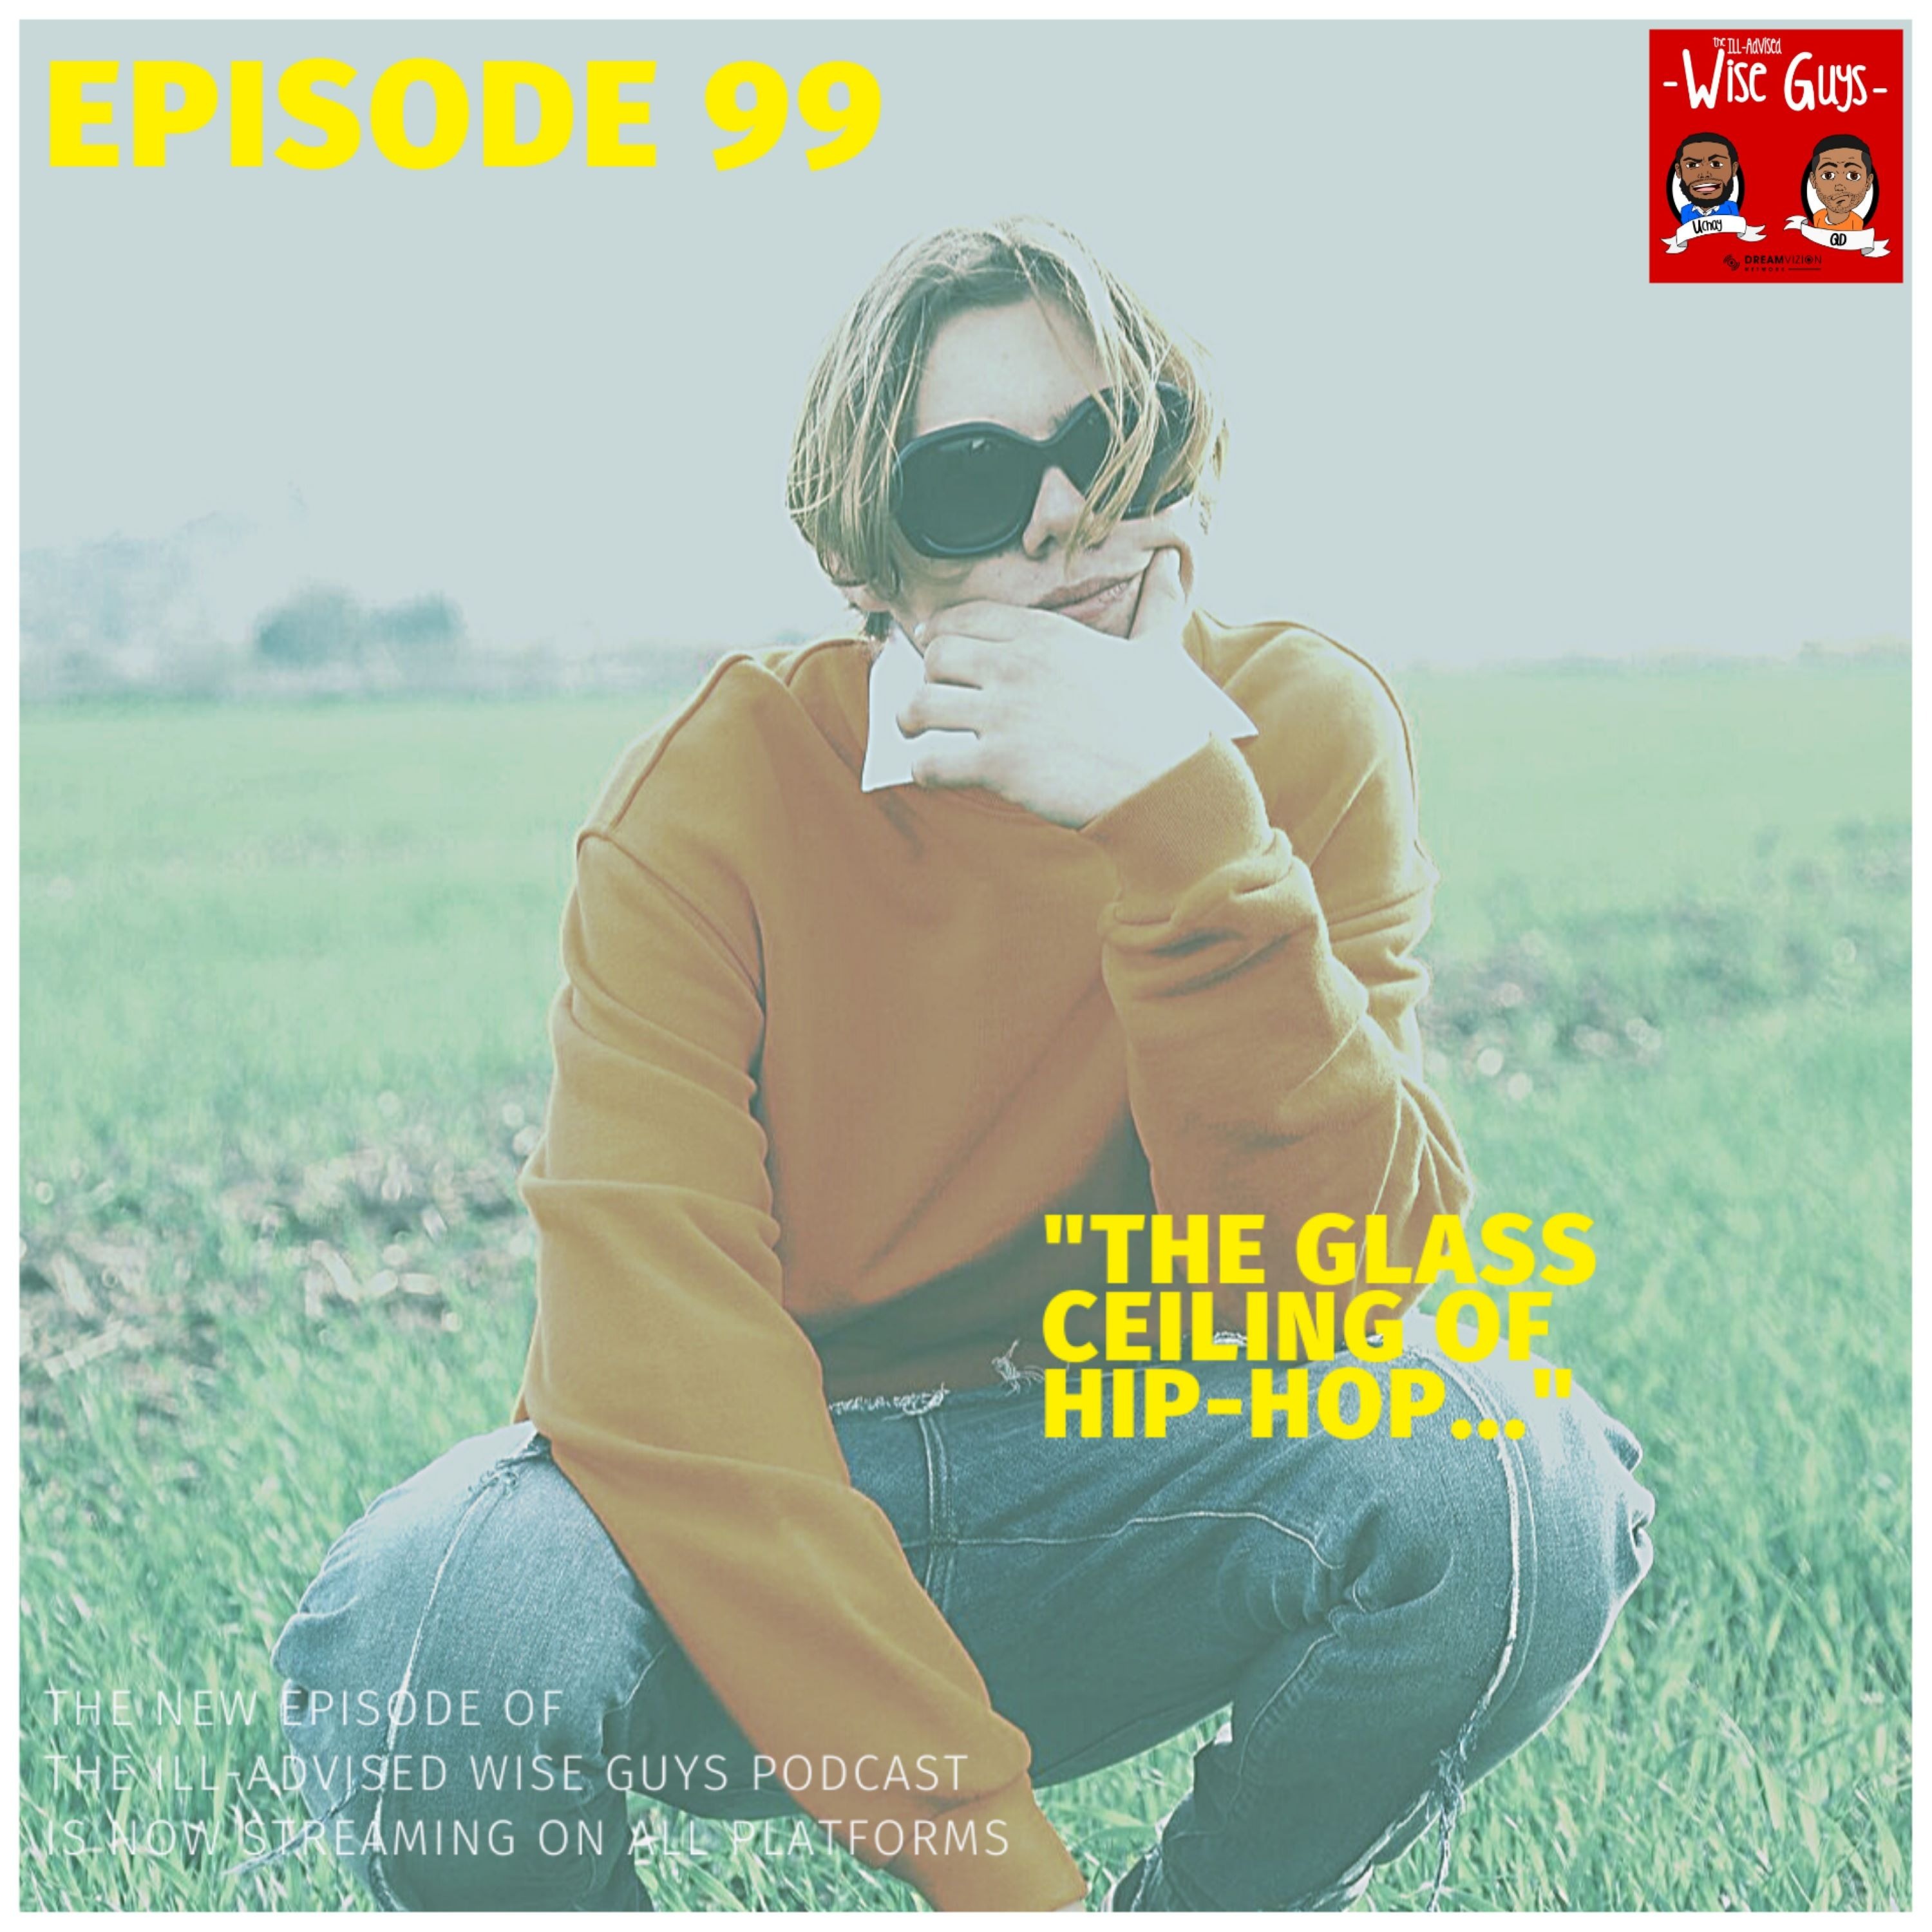 Episode 99 - "The Glass Ceiling of Hip-Hop..." Image